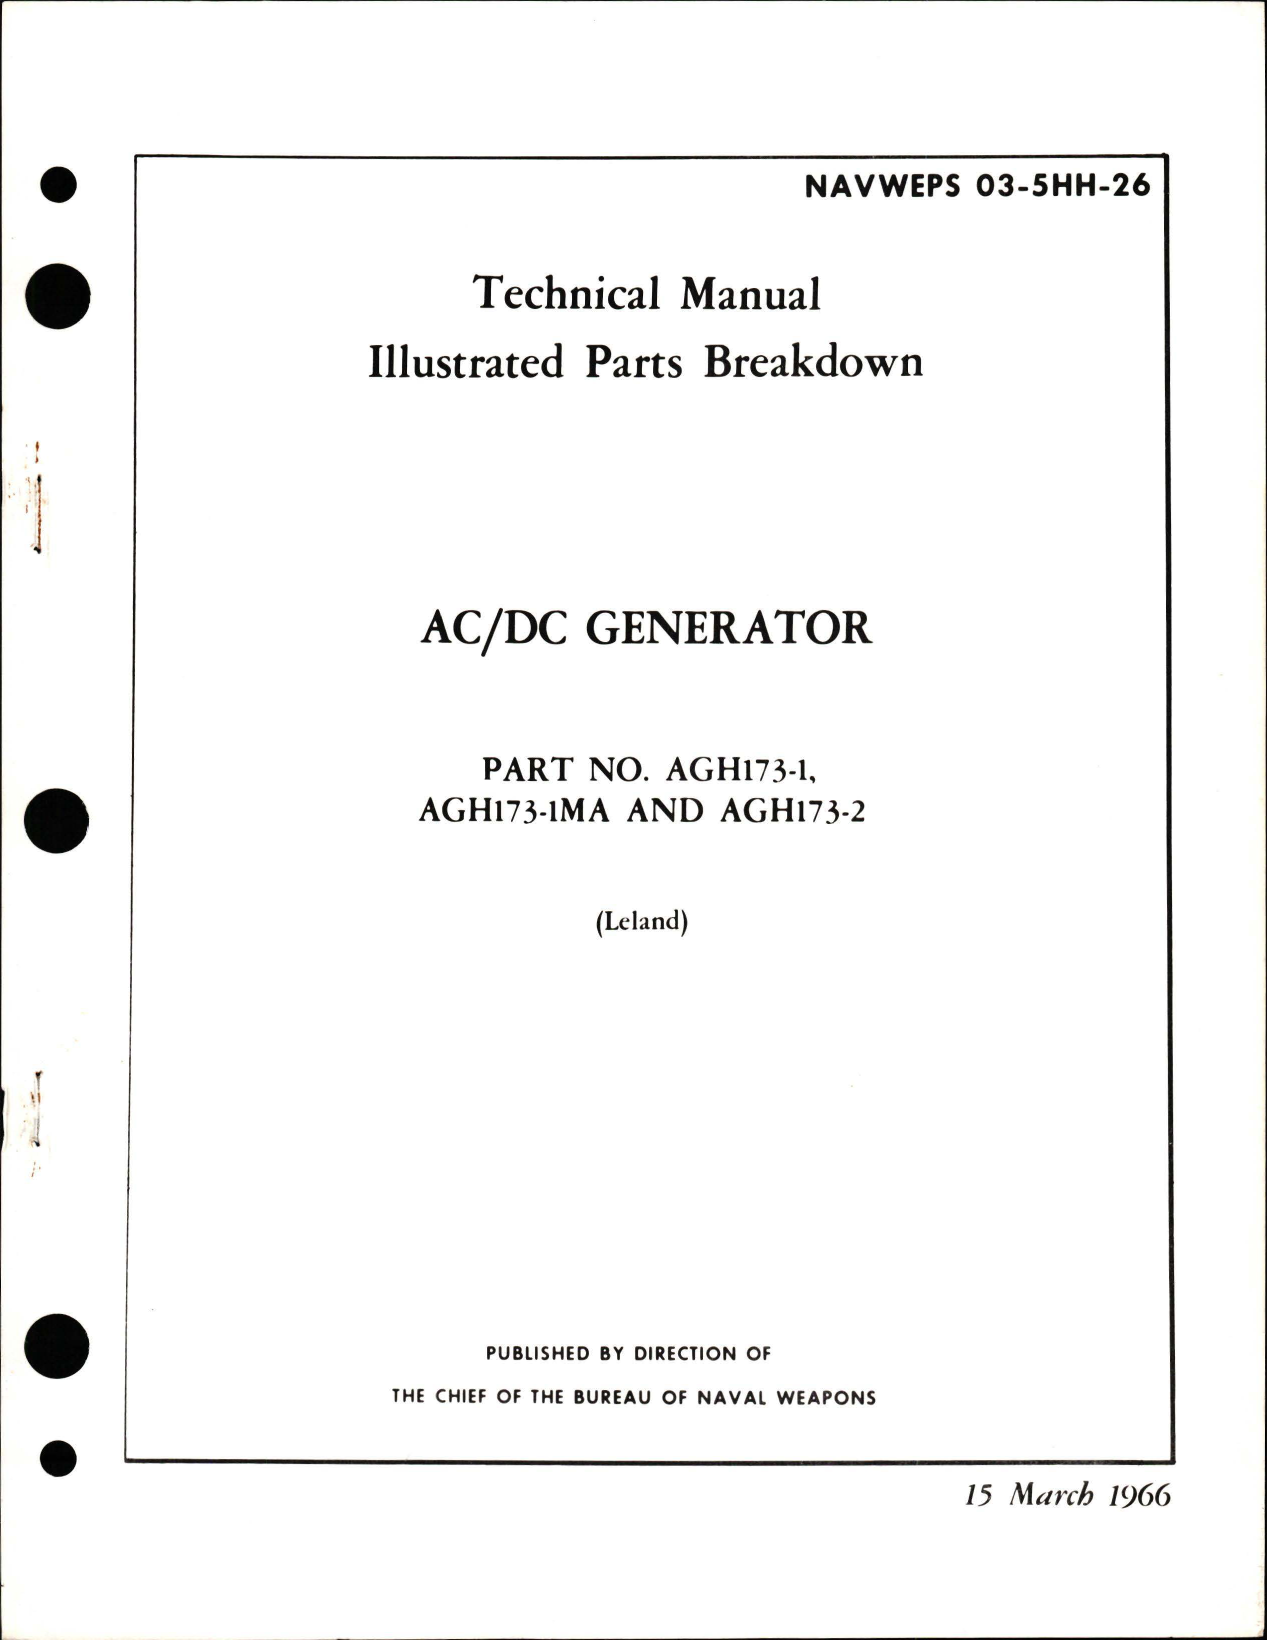 Sample page 1 from AirCorps Library document: Illustrated Parts Breakdown for AC-DC Generator - Parts AGH173-1, AGH173-1MA and AGH173-2 